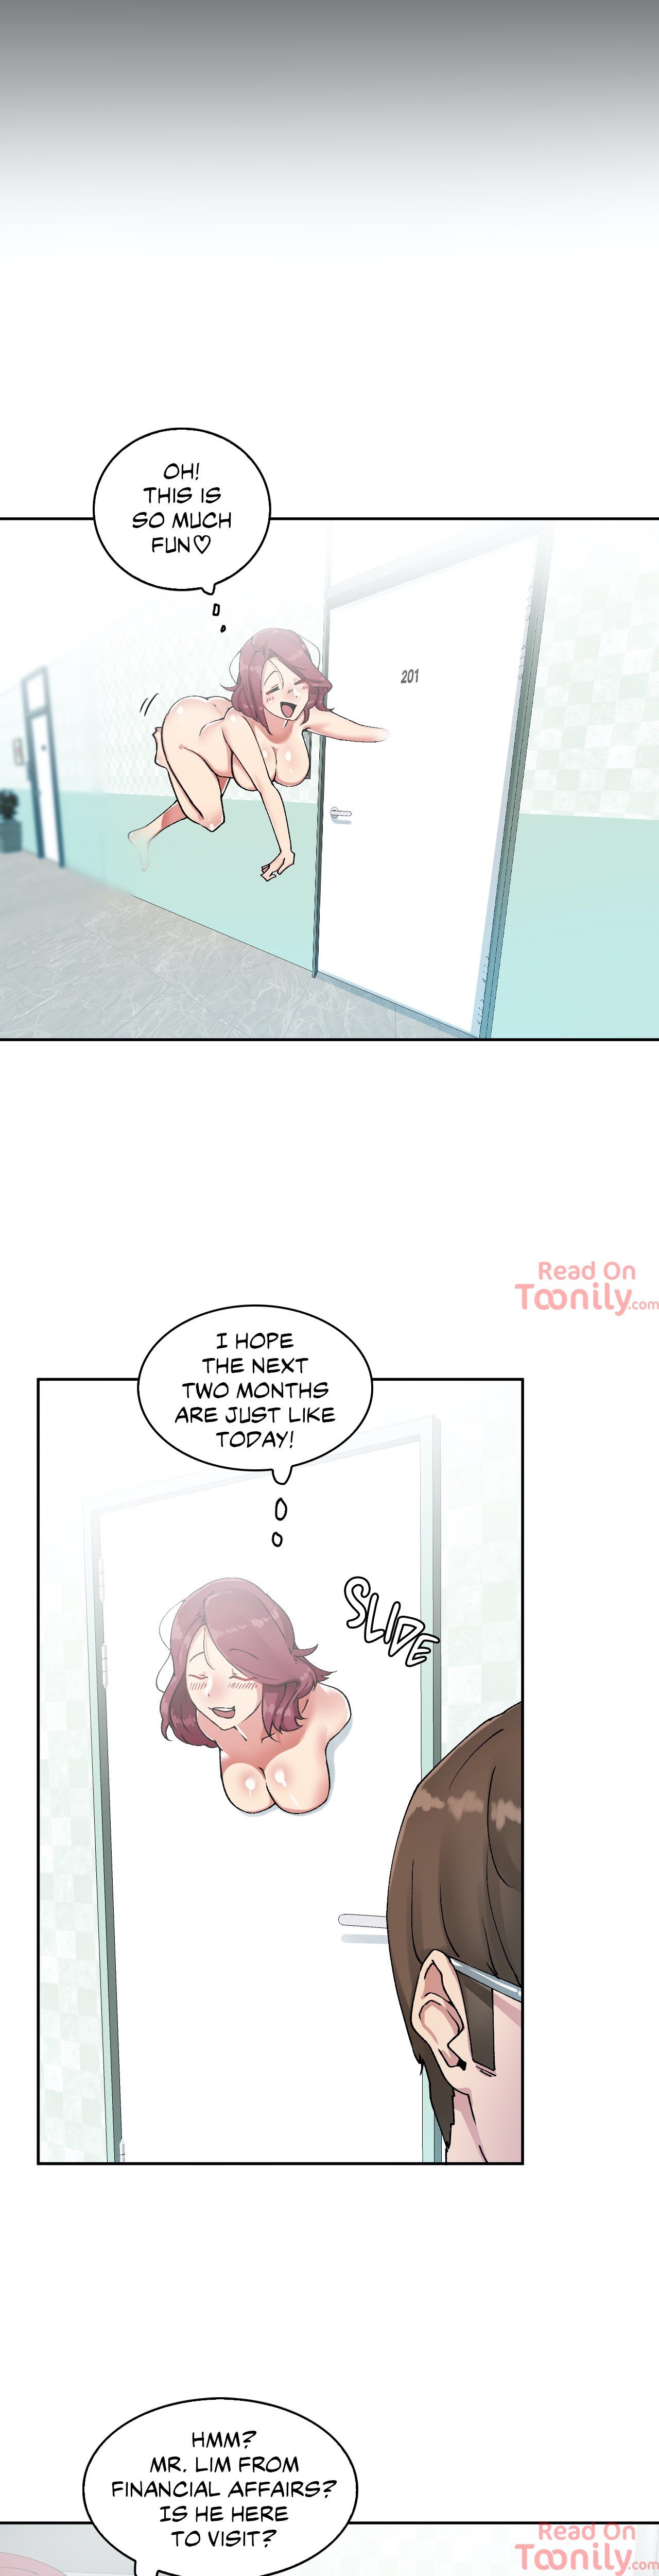 The Girl Hiding in the Wall - Chapter 4 Page 21